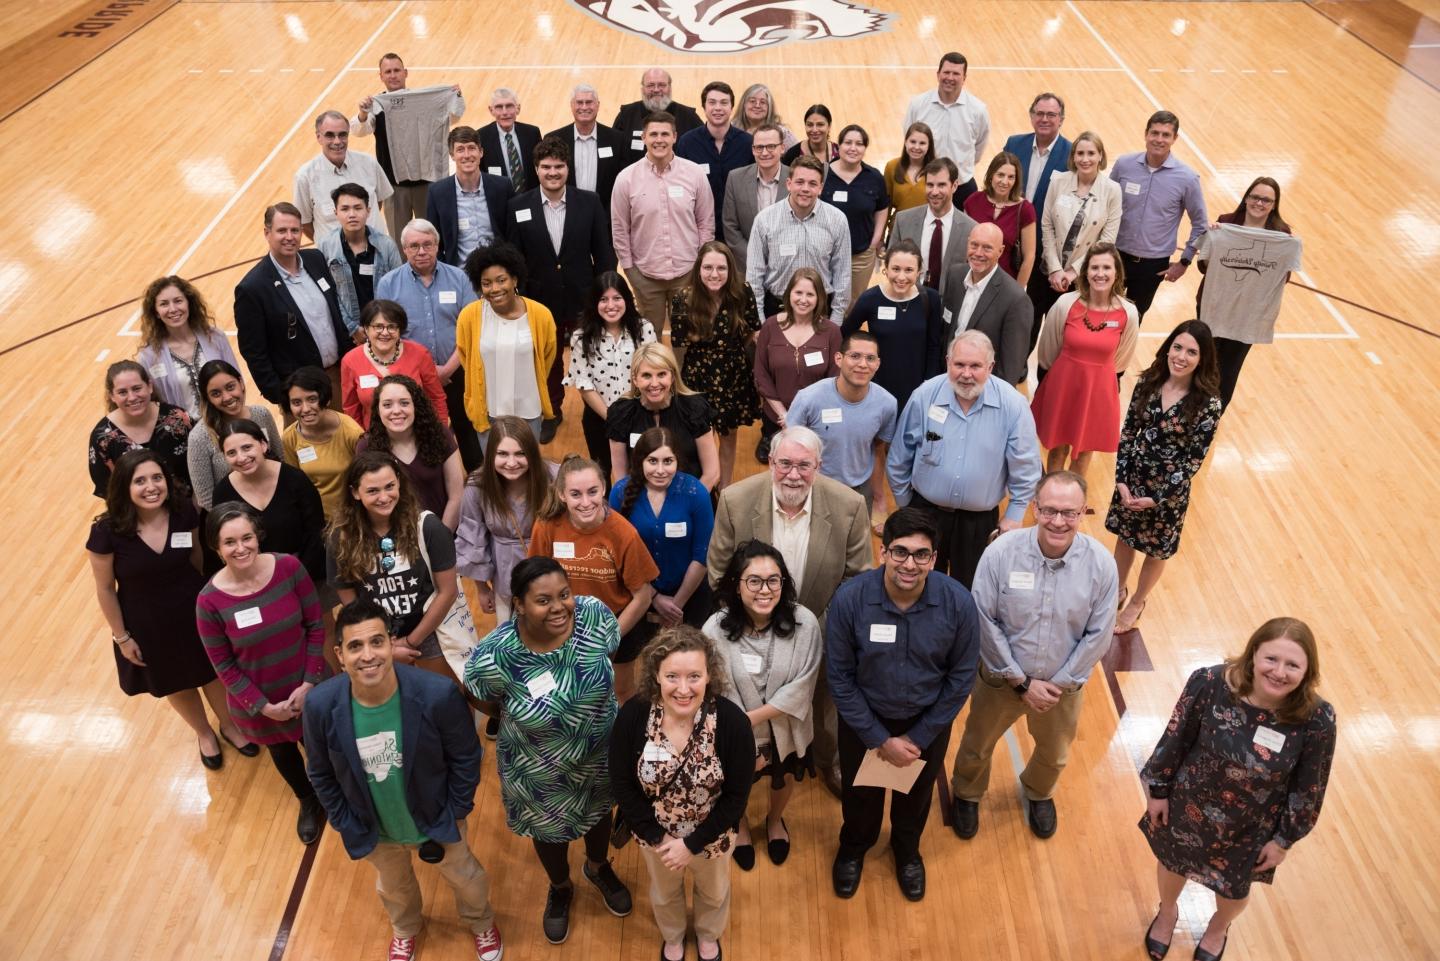 A large group of alumni and students in the 2019 1869 Scholars cohort